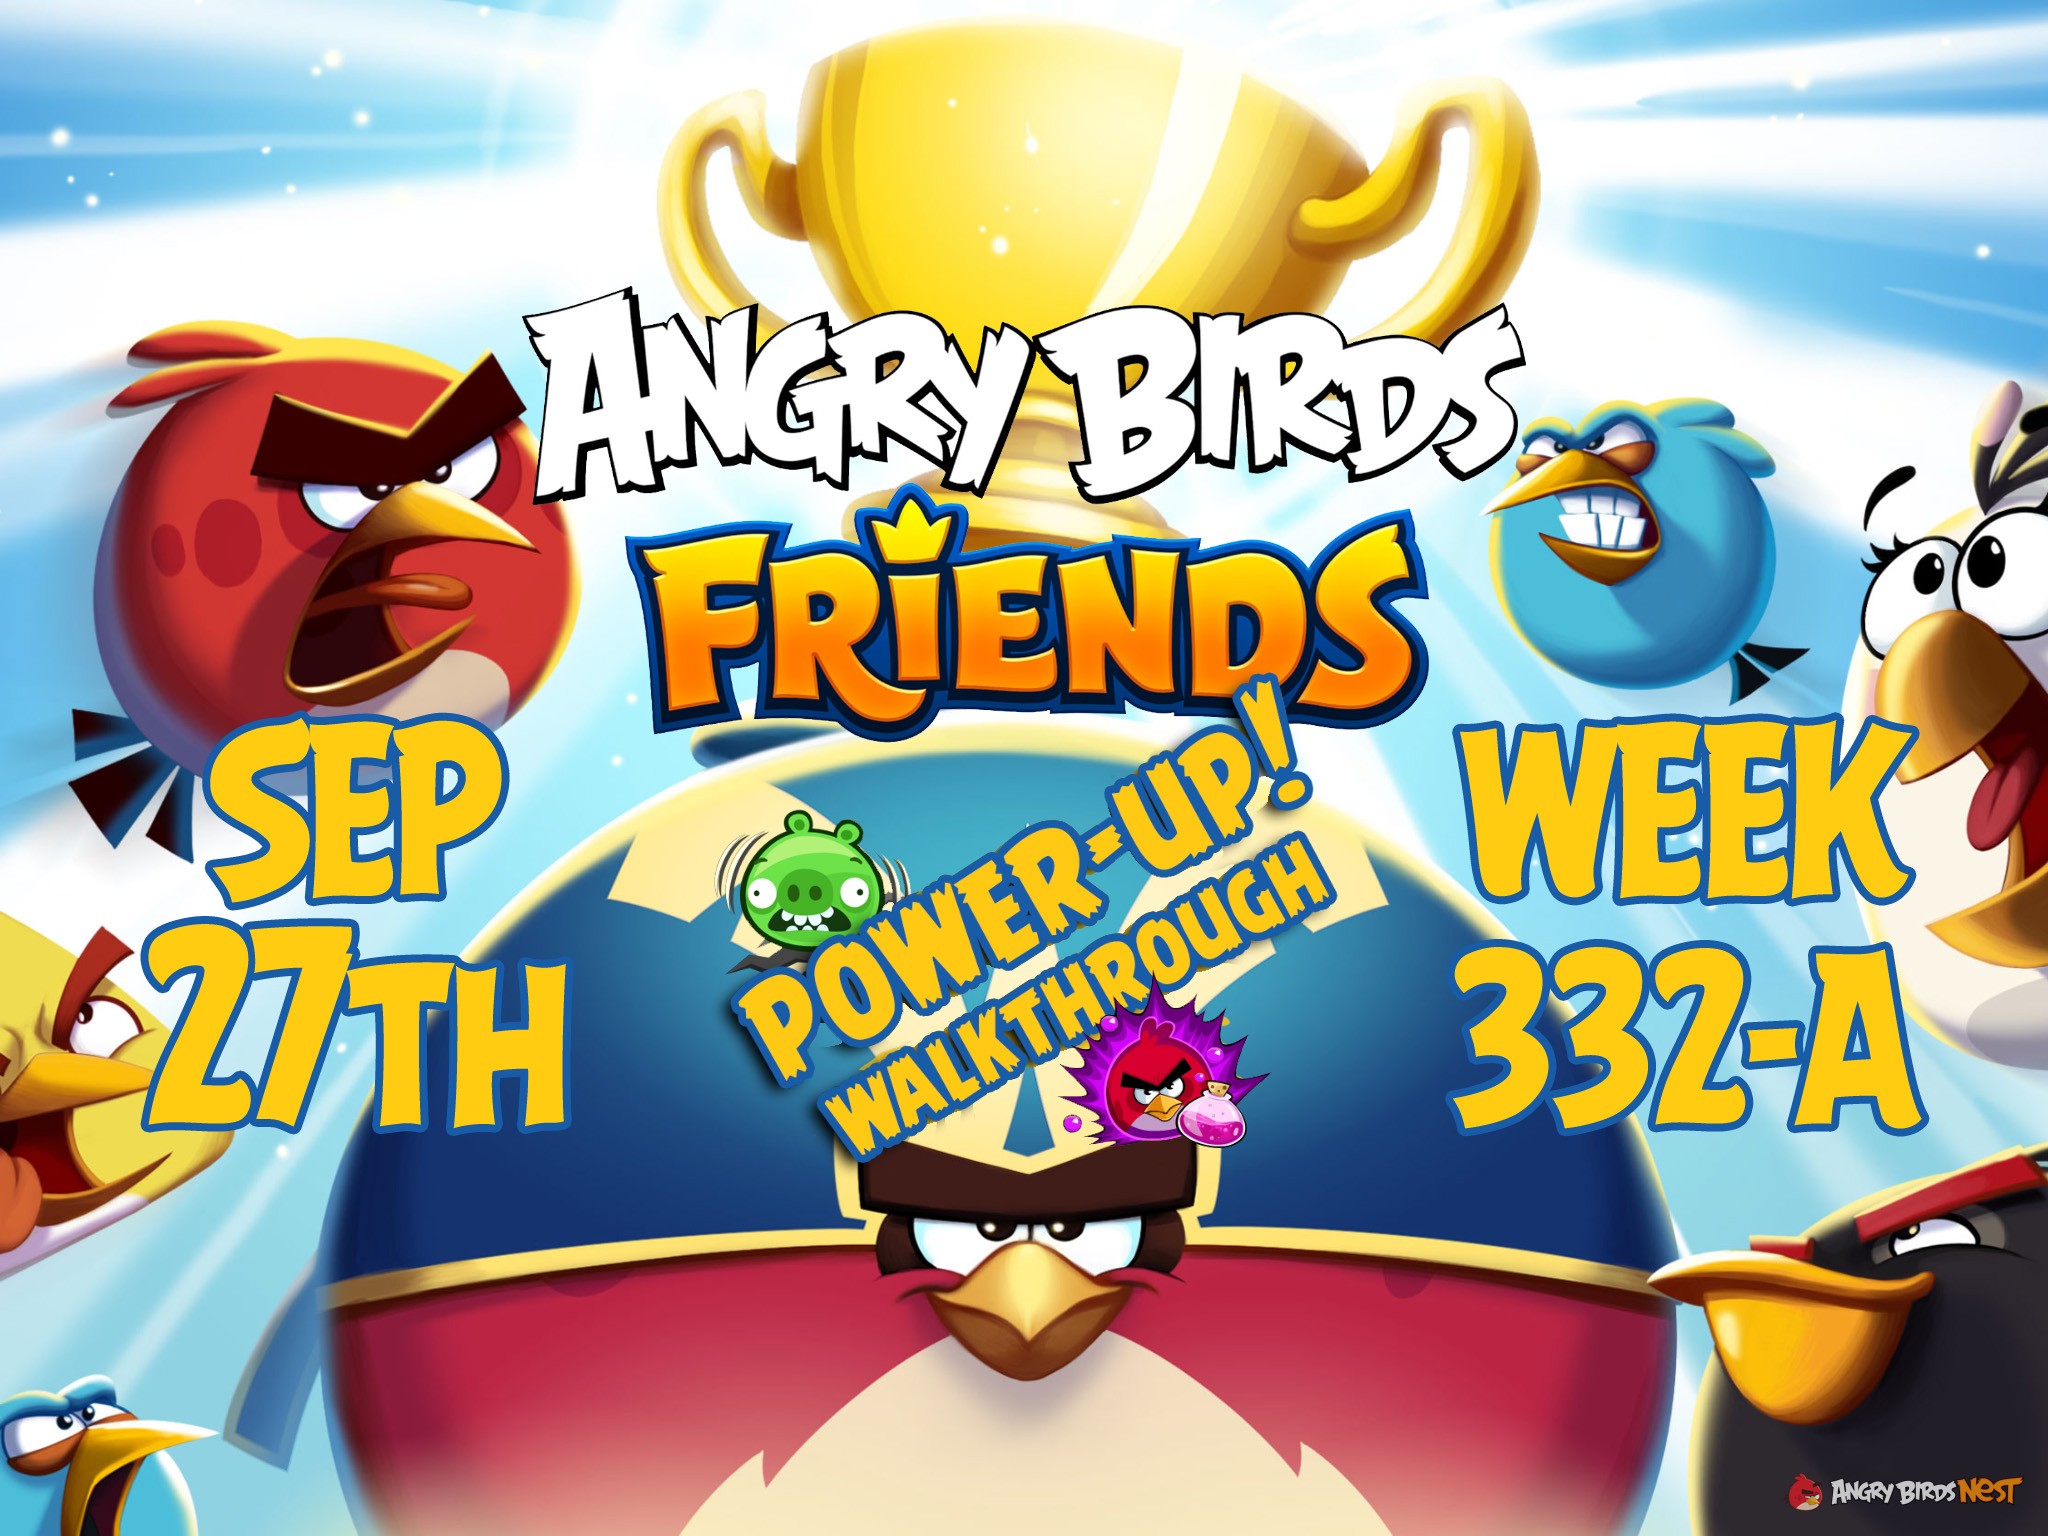 Angry-Birds-Friends-Tournament-Week-332-A-Feature-Image-PU